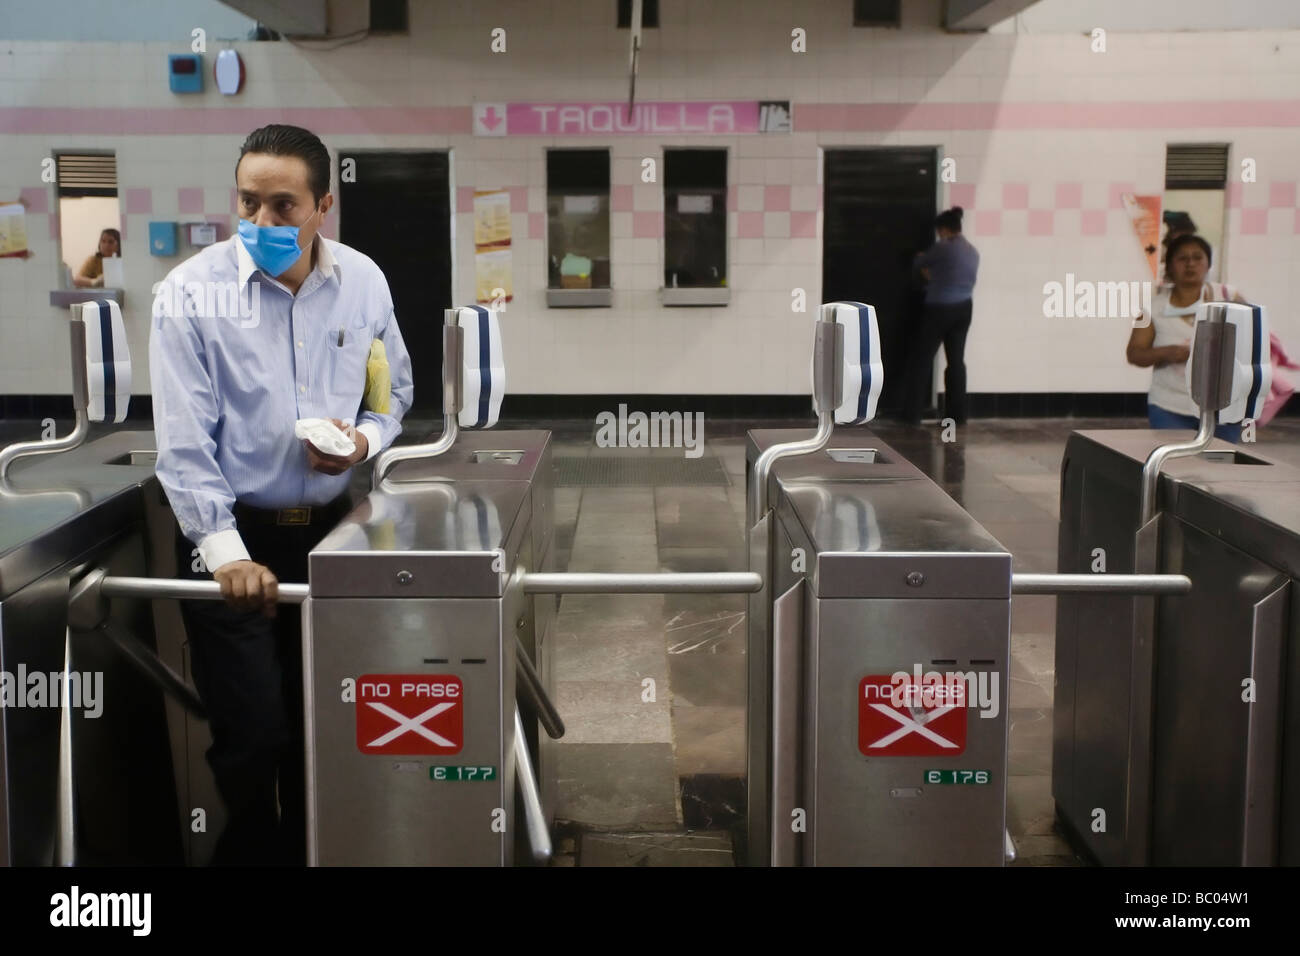 A man wearing a mask walks through a turnstile to get into the metro station in Mexico City, DF, Mexico. Stock Photo